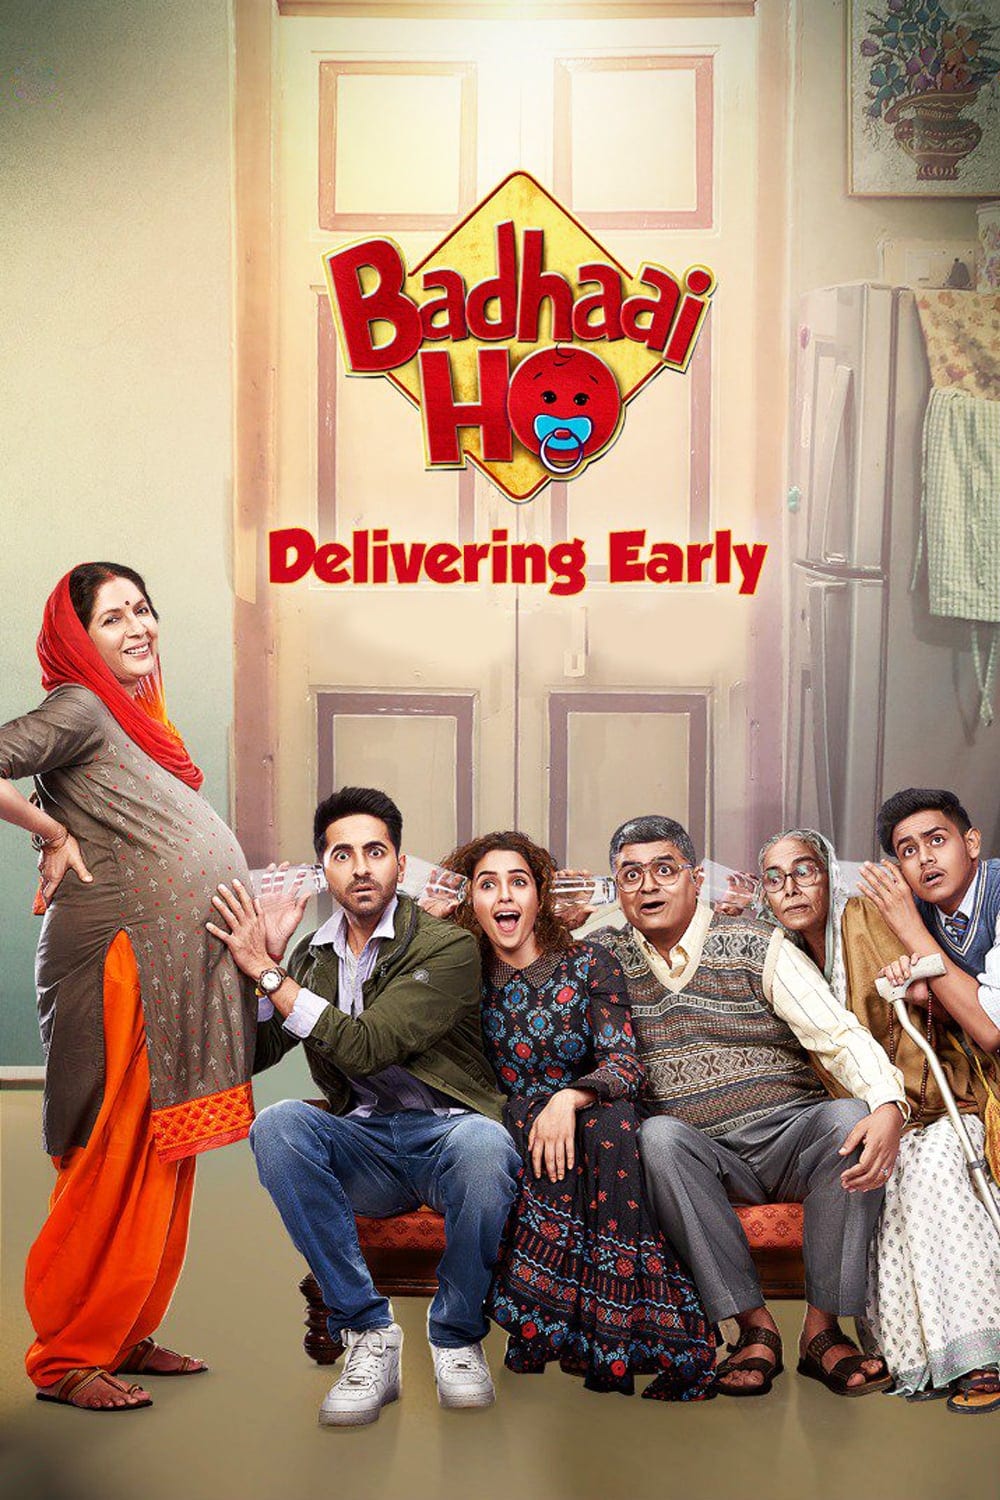 Poster for the movie "Badhaai Ho"